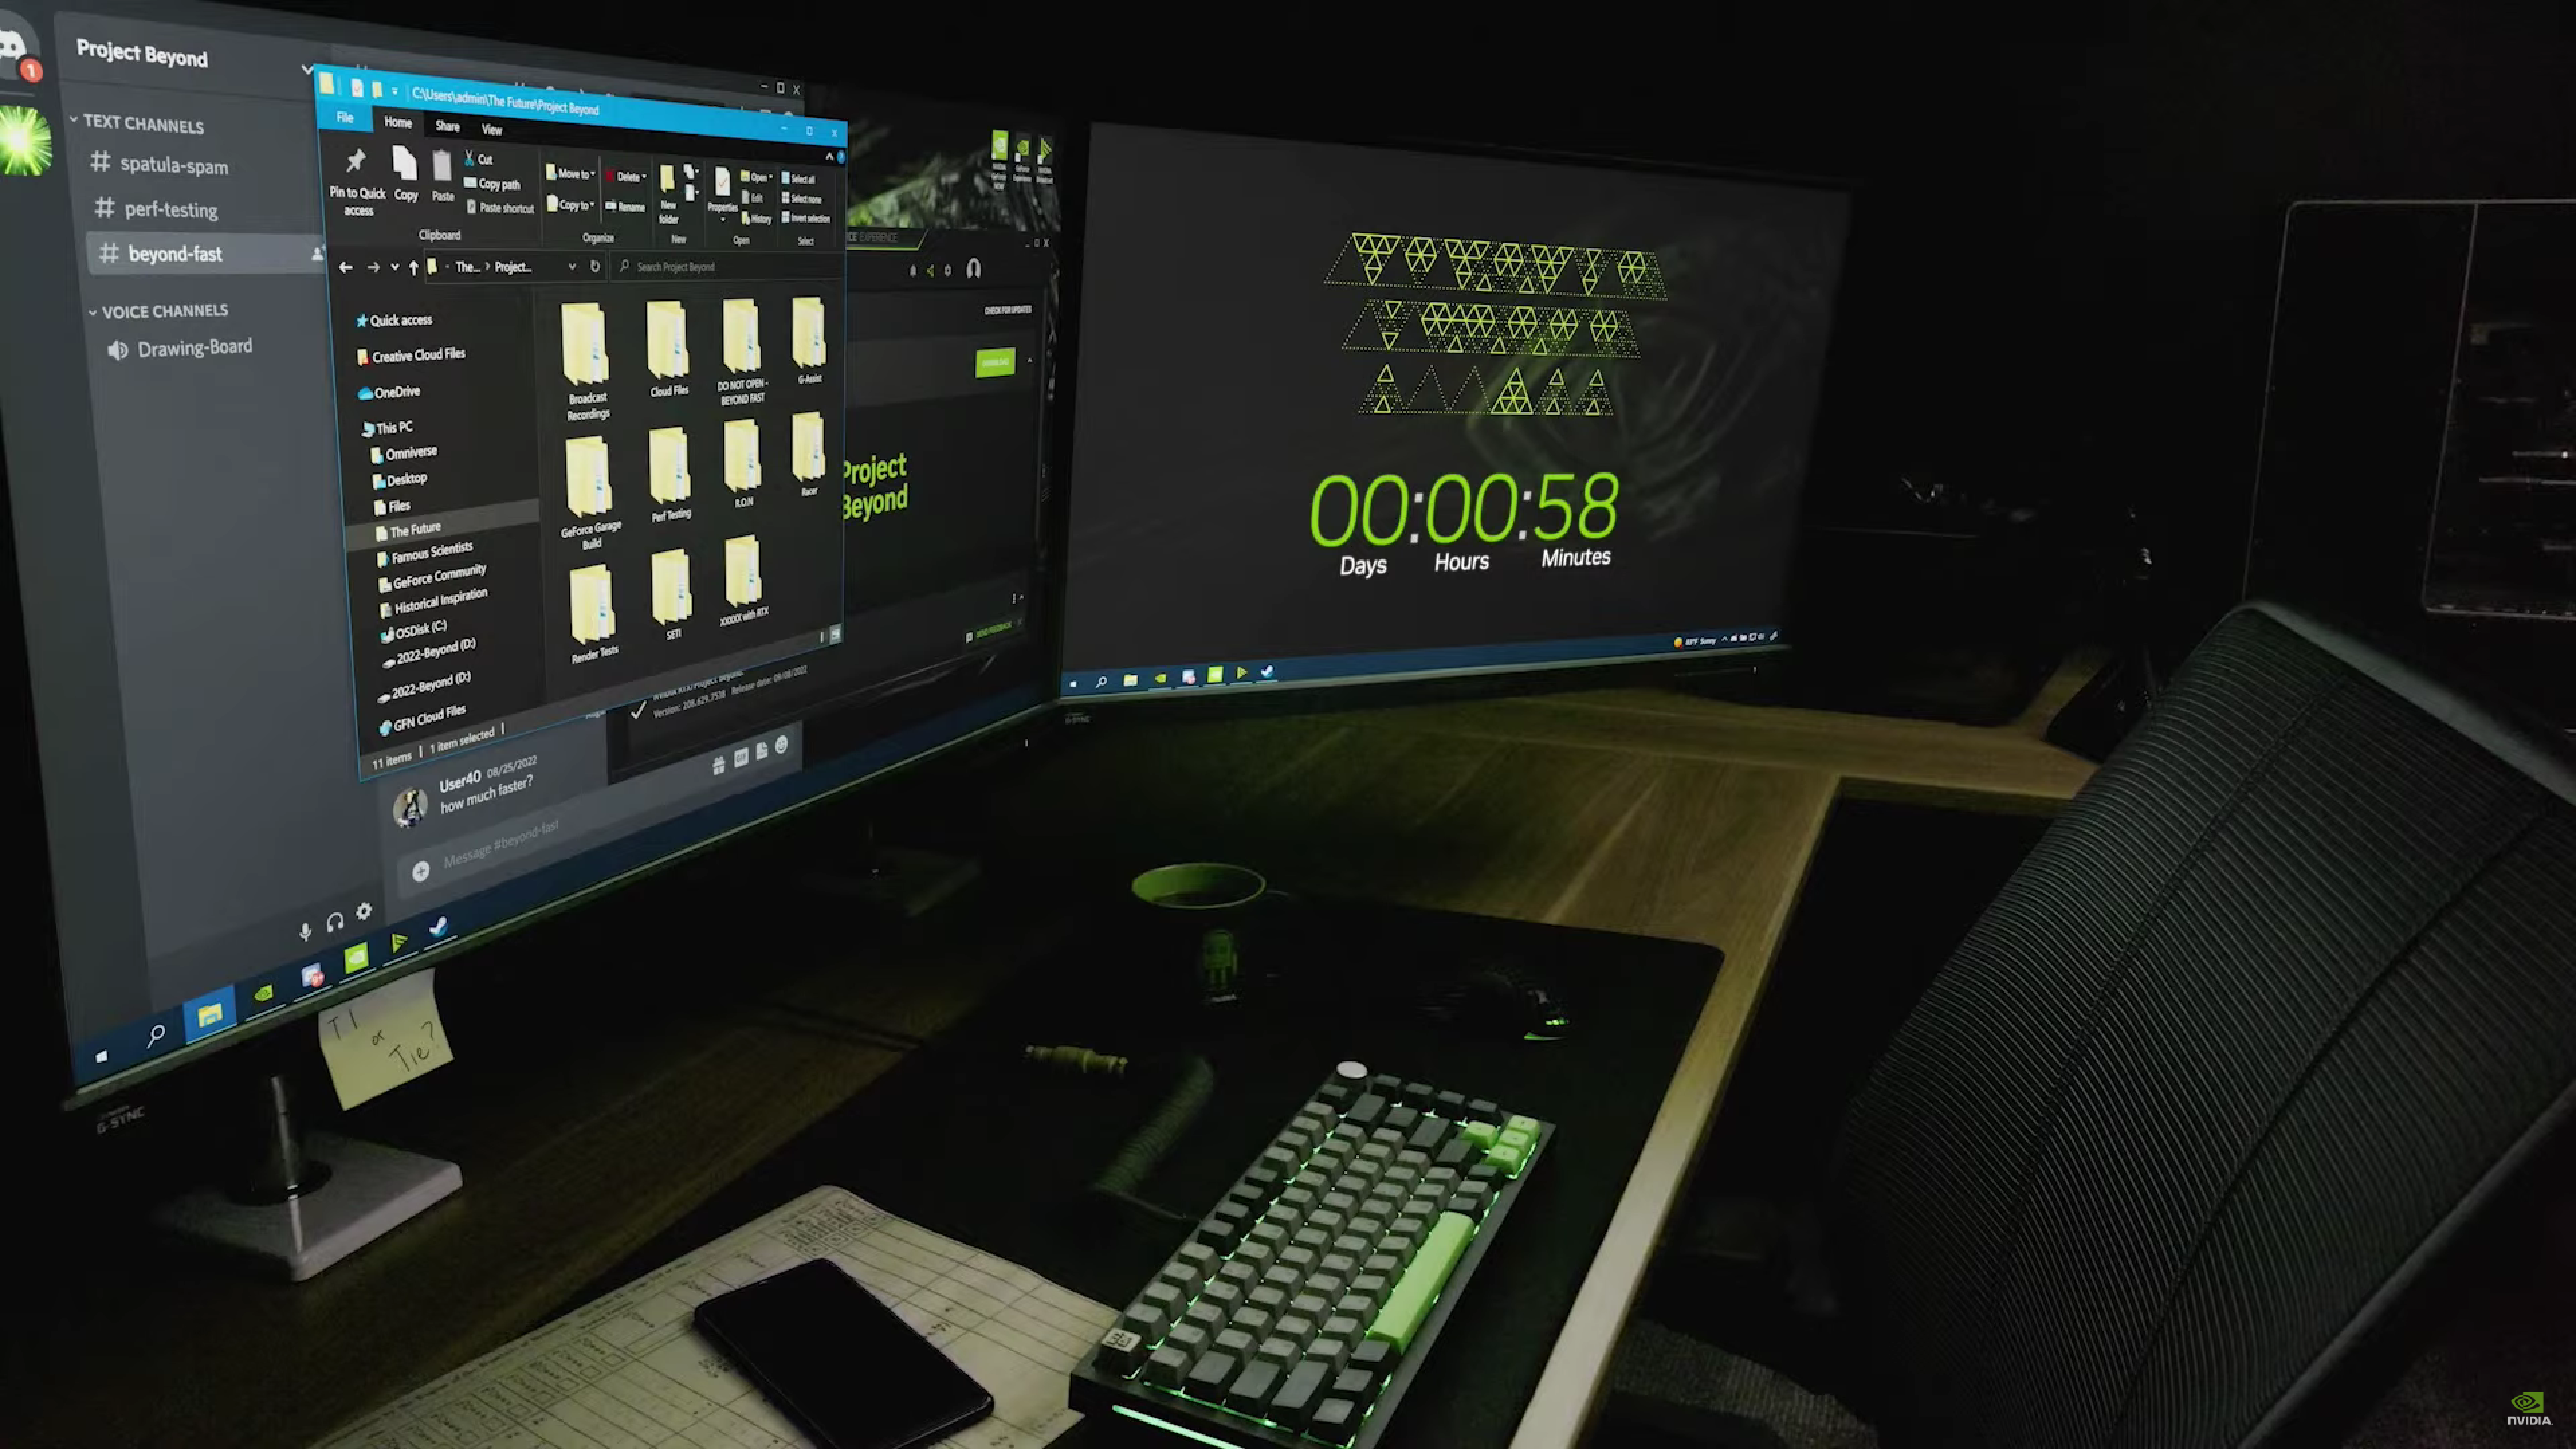 Dual-screen computer displaying a countdown on one screen and a desktop with Discord and file explorer open, showing 'Nvidia' teasers.